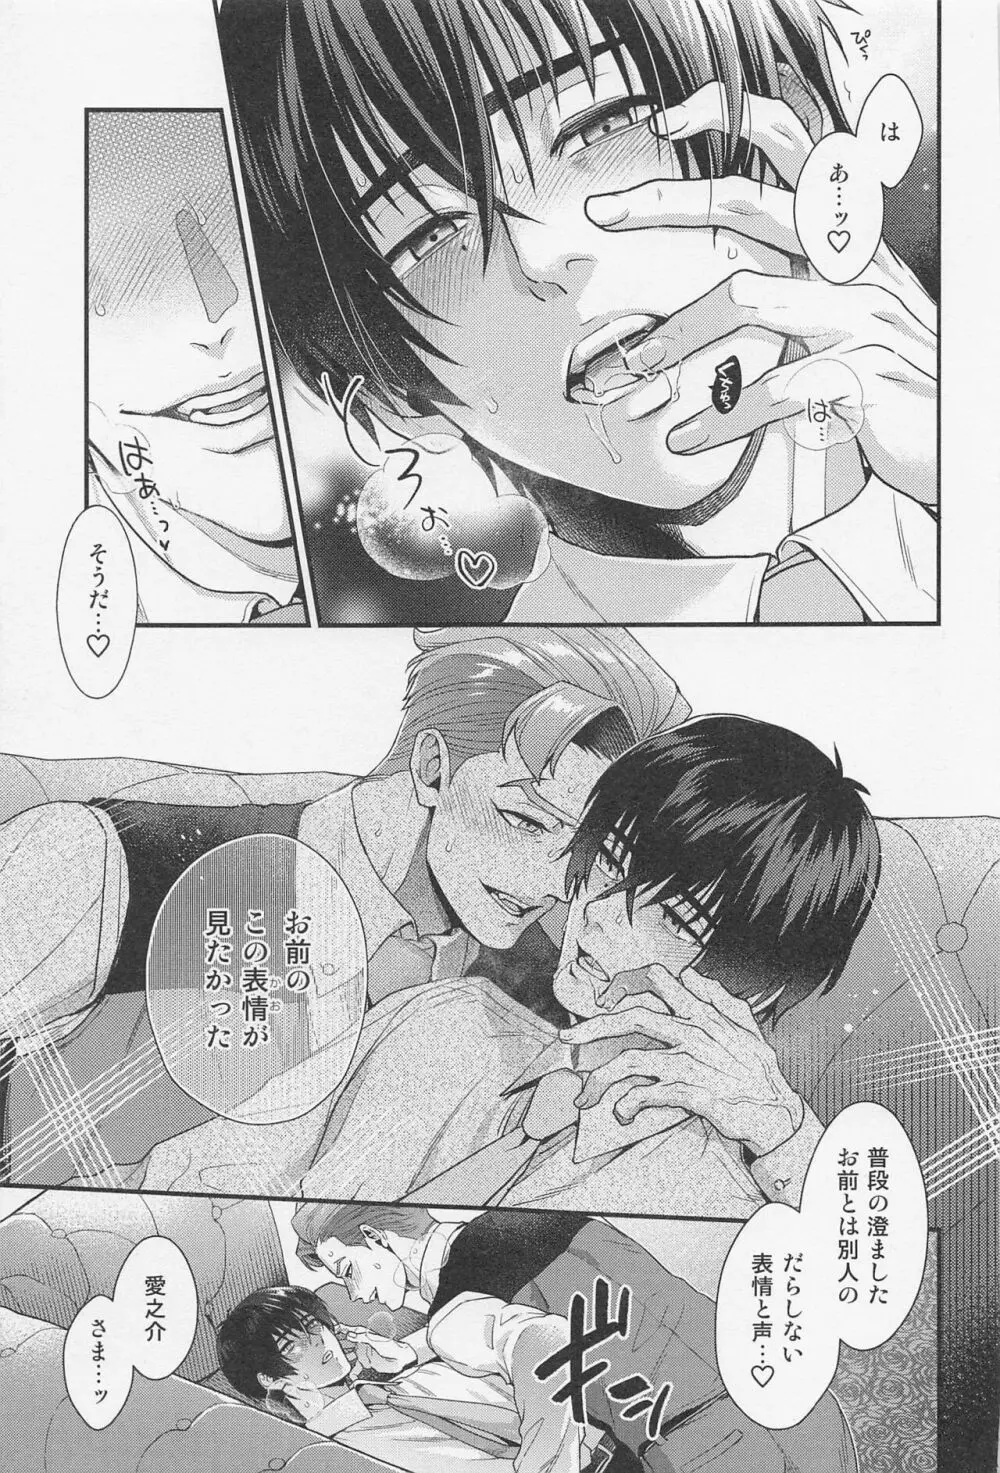 LOVE FIXED POINT - 愛の定点観測 - page10